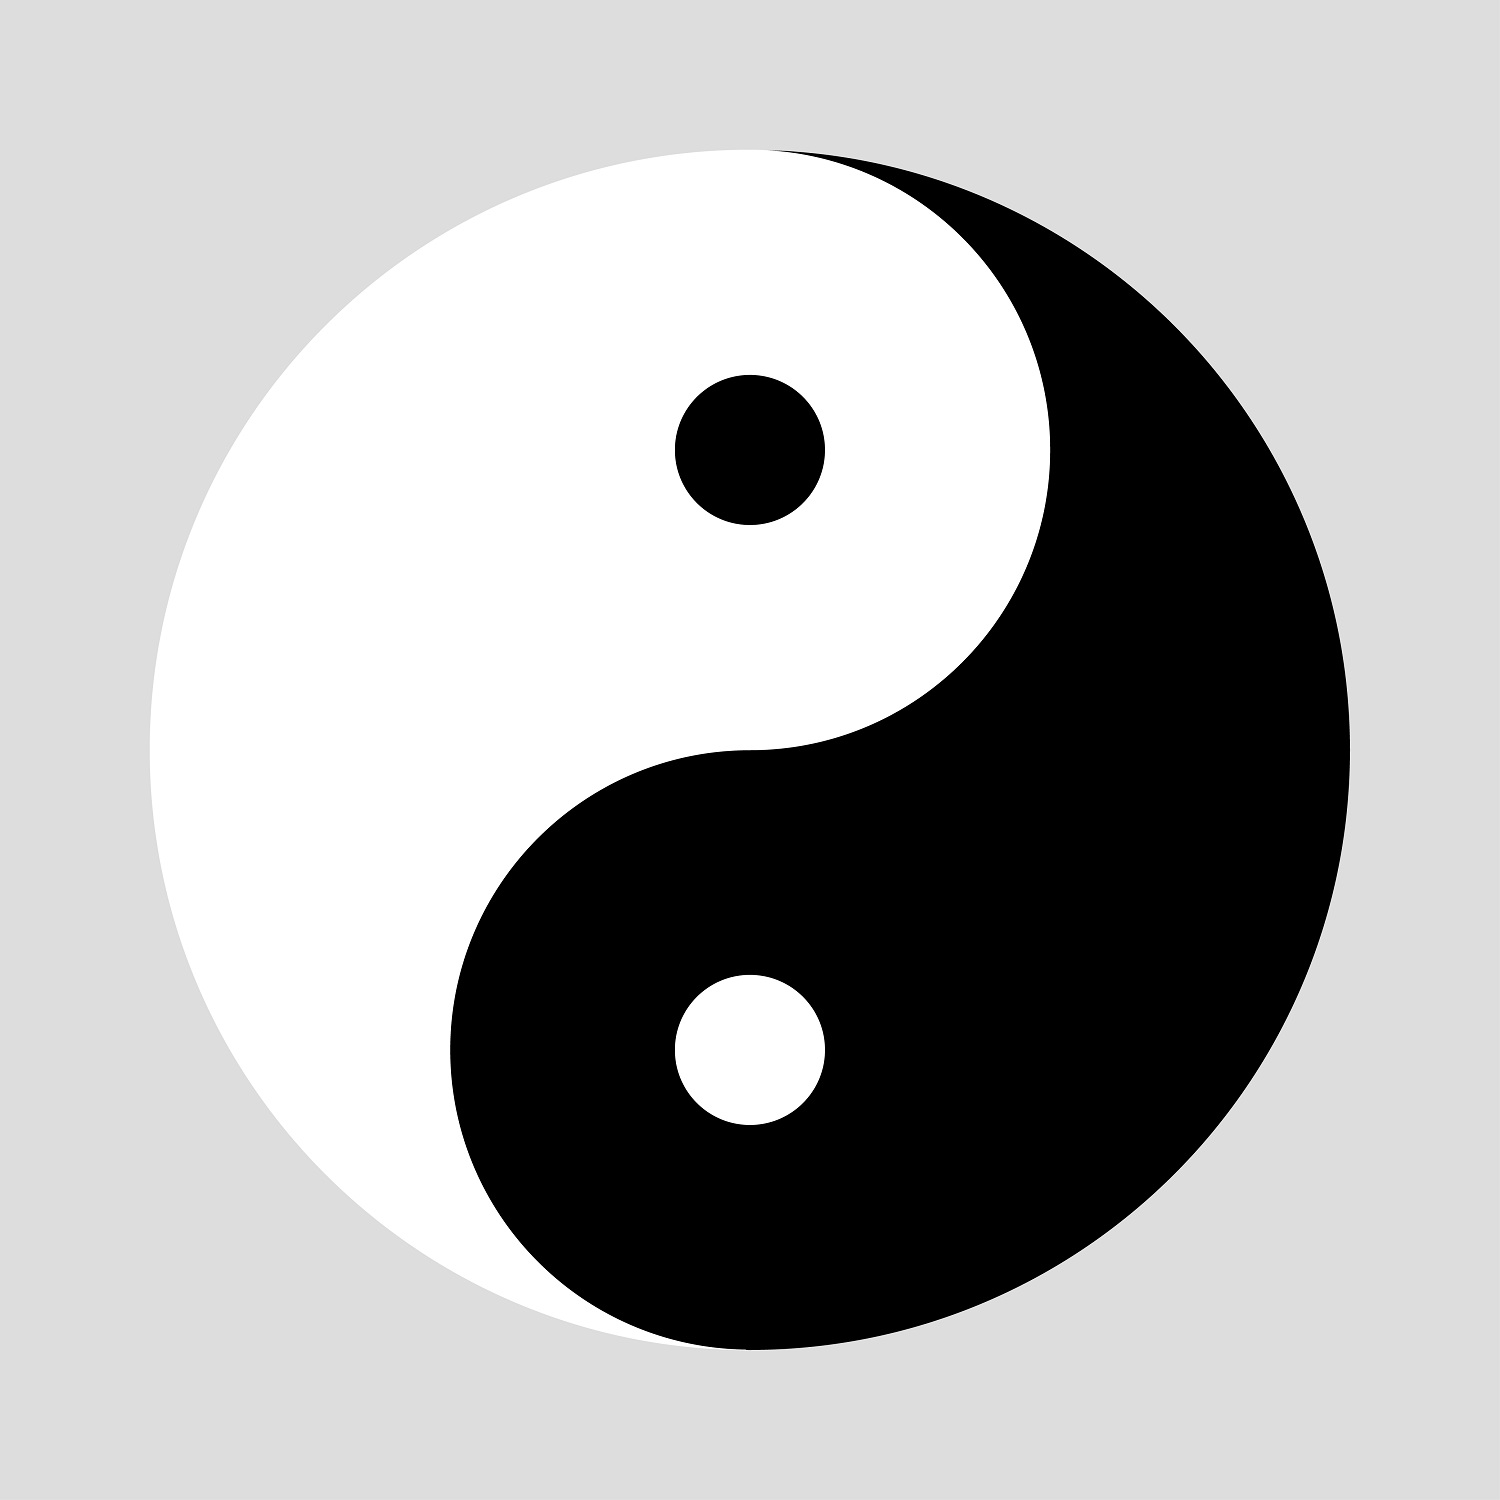 Cut out image of the Yin and Yang symbol